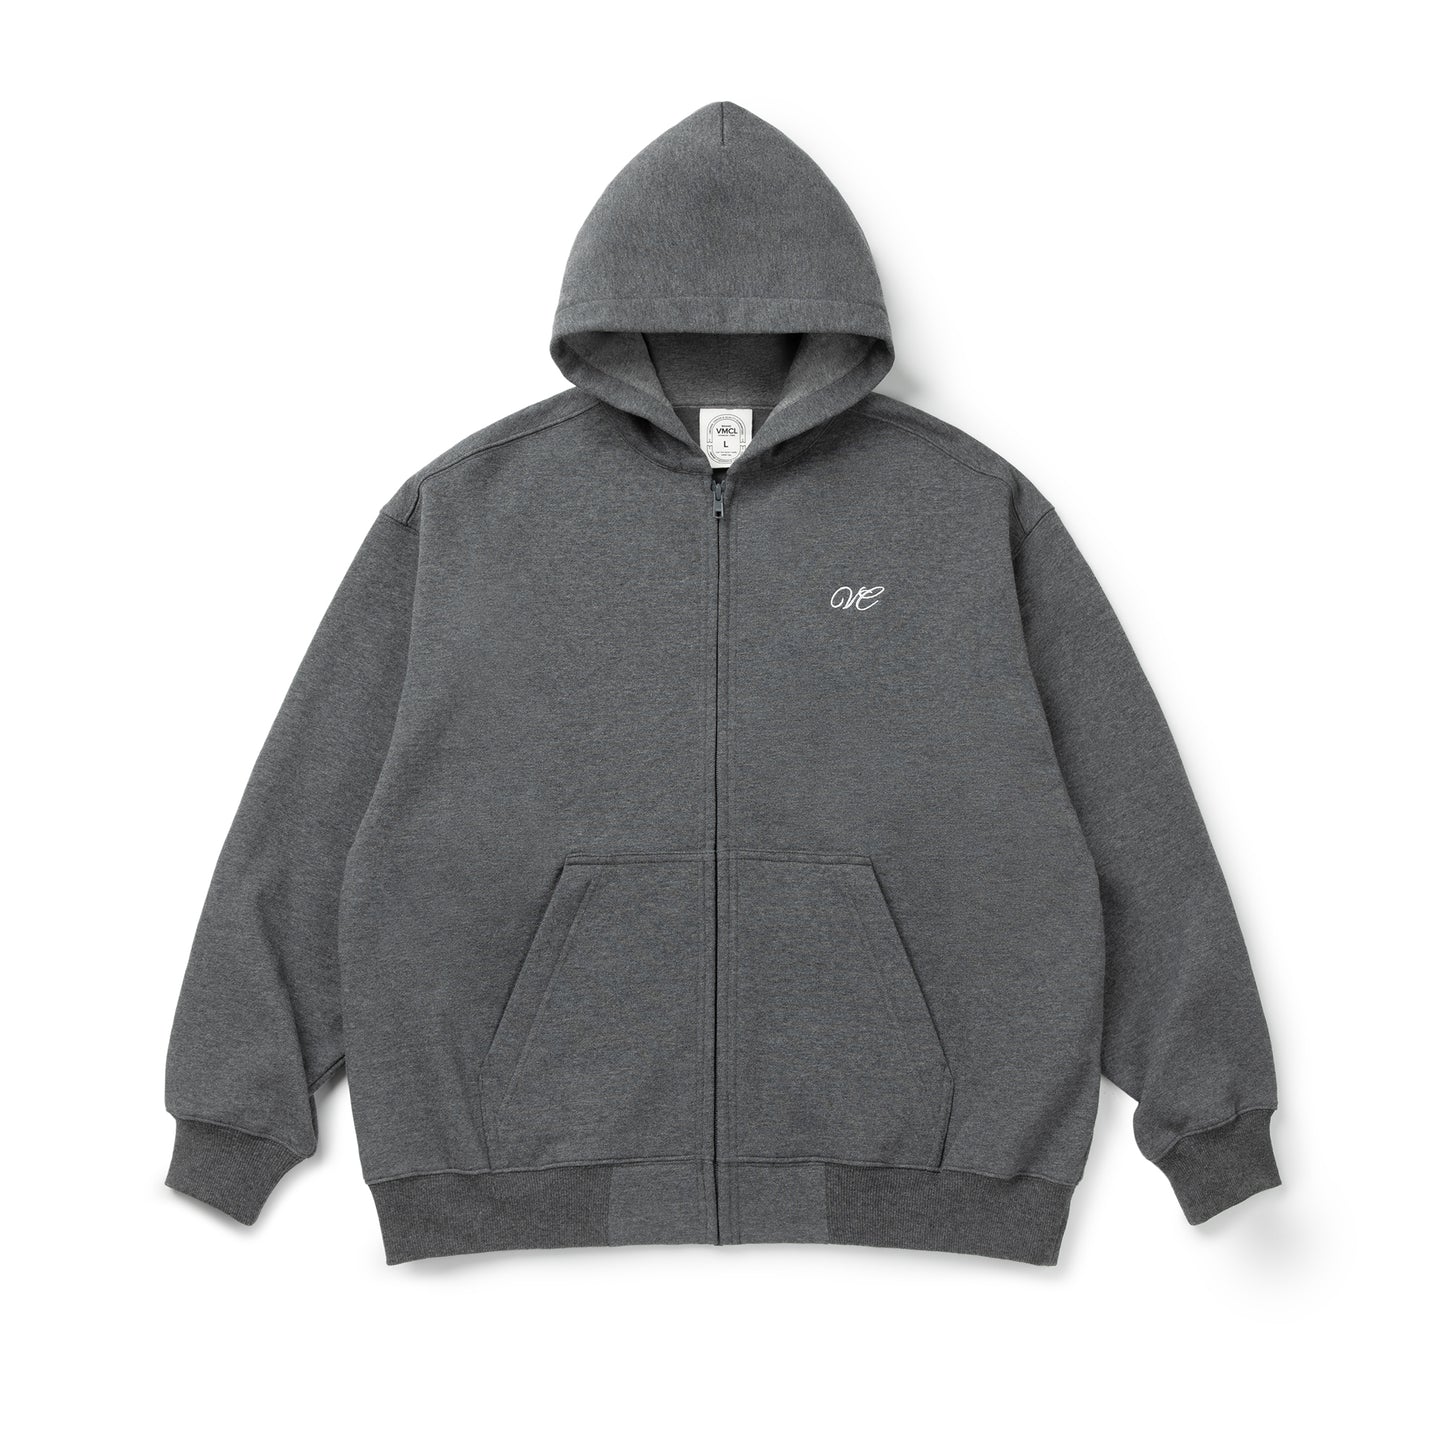 HEAVYWEIGHT COTTON-FILLED, LOOSE-FITTING, HOODED SWEATSHIRT V64777